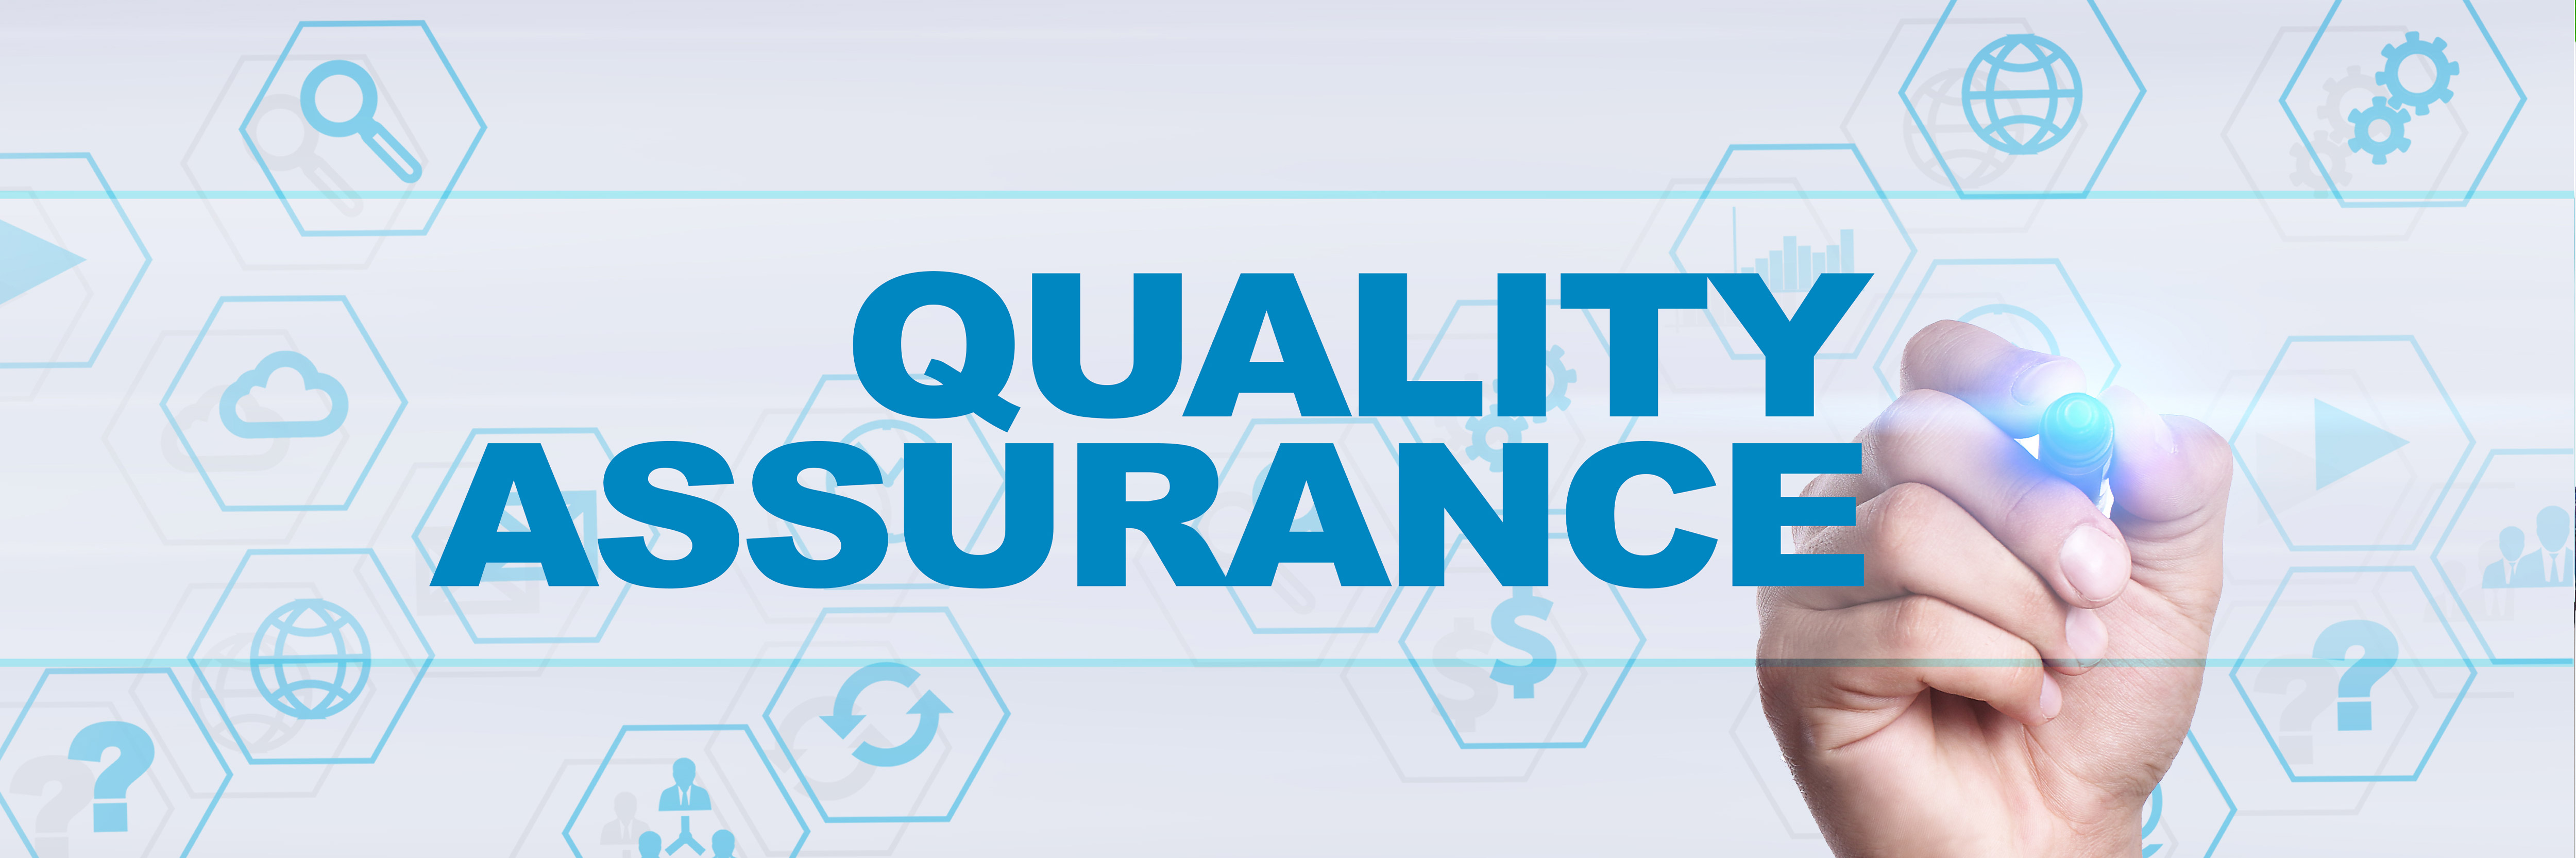 the word quality assurance in text